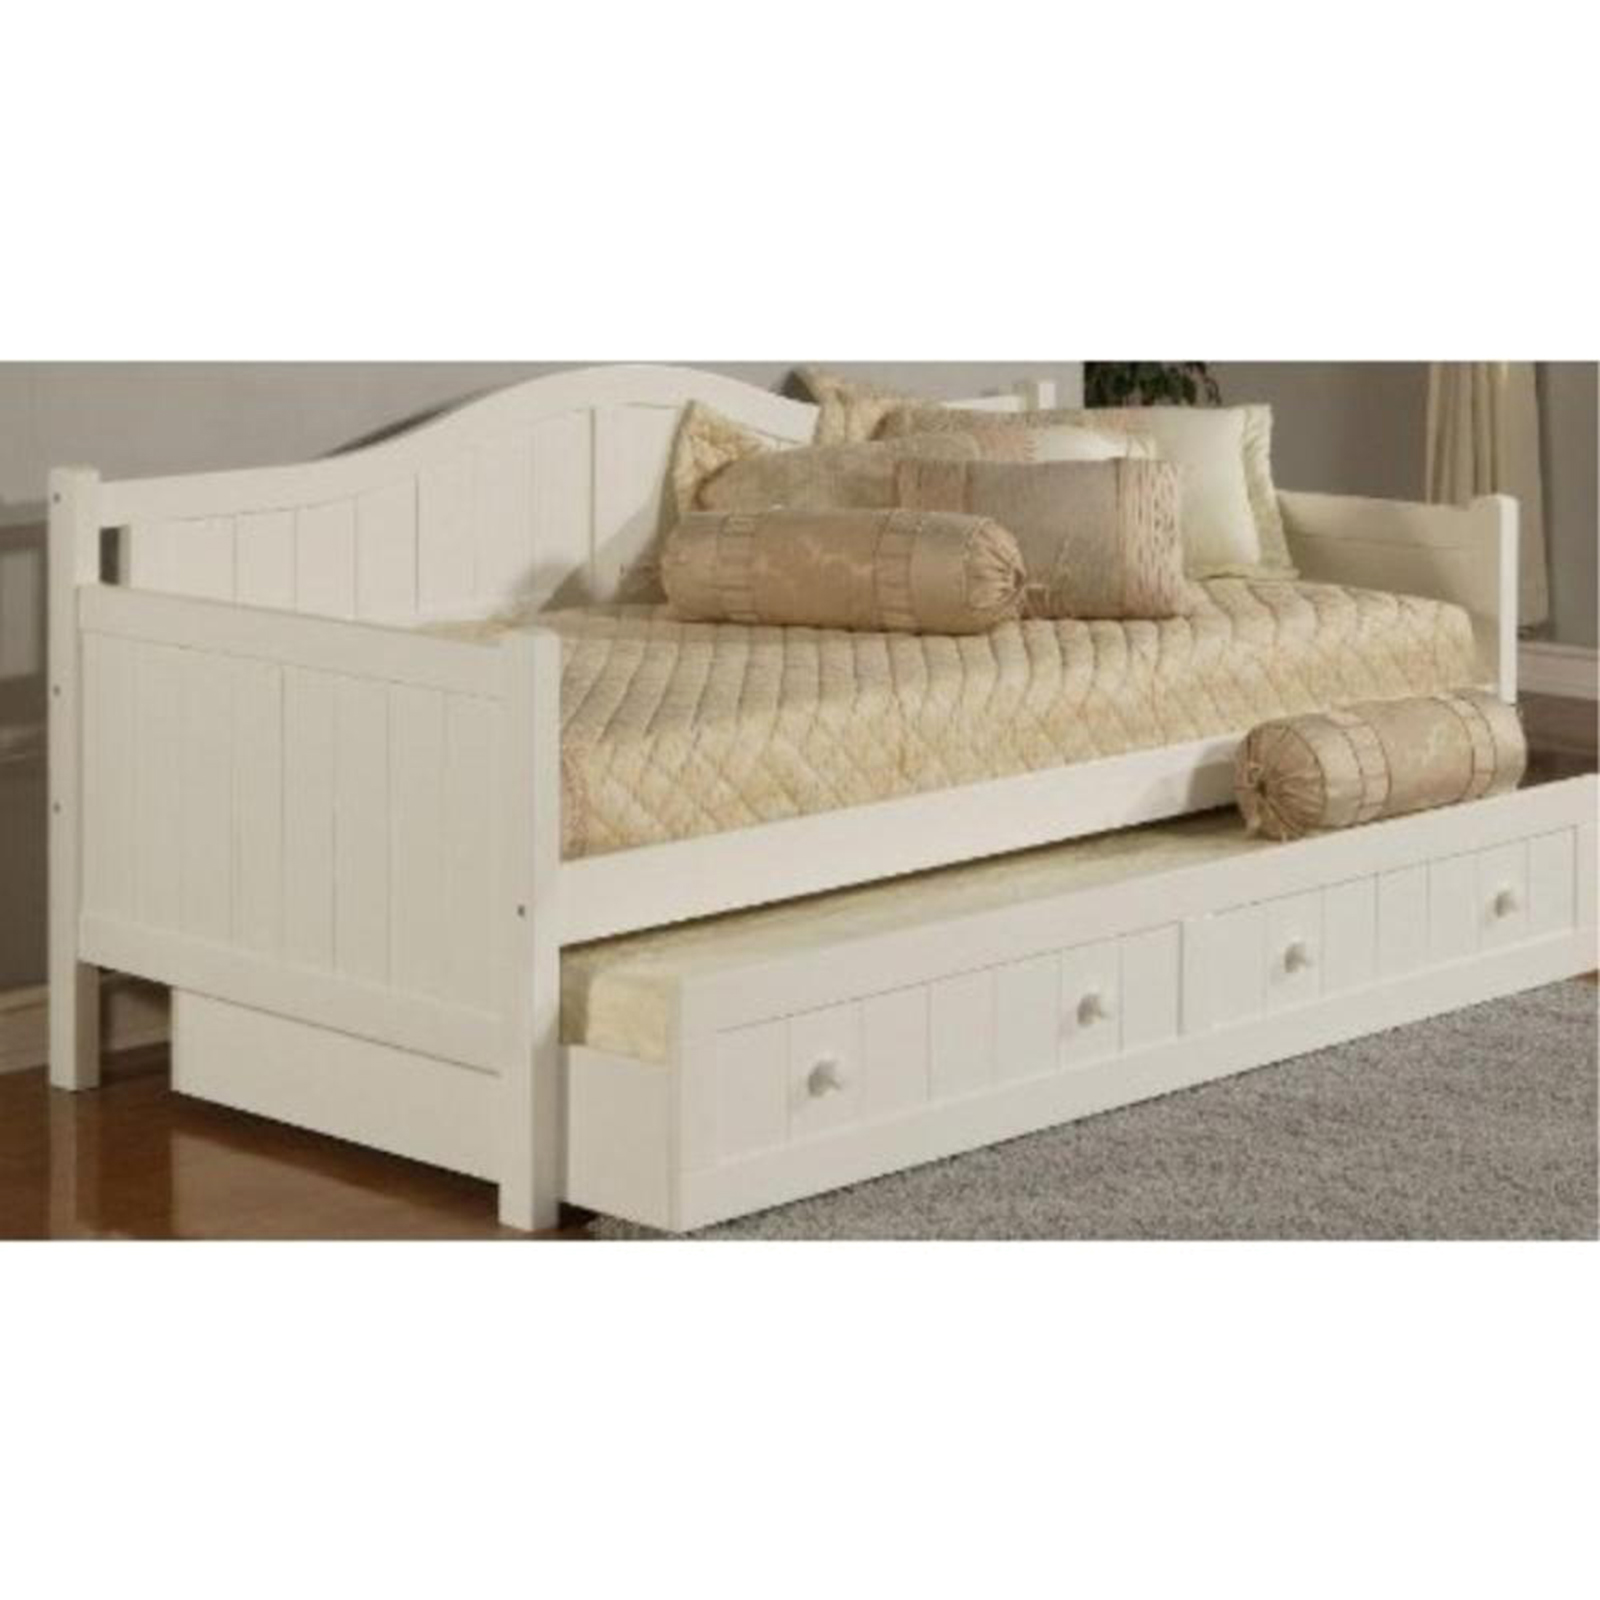 Hillsdale Staci Full Trundle Wood Daybed - White